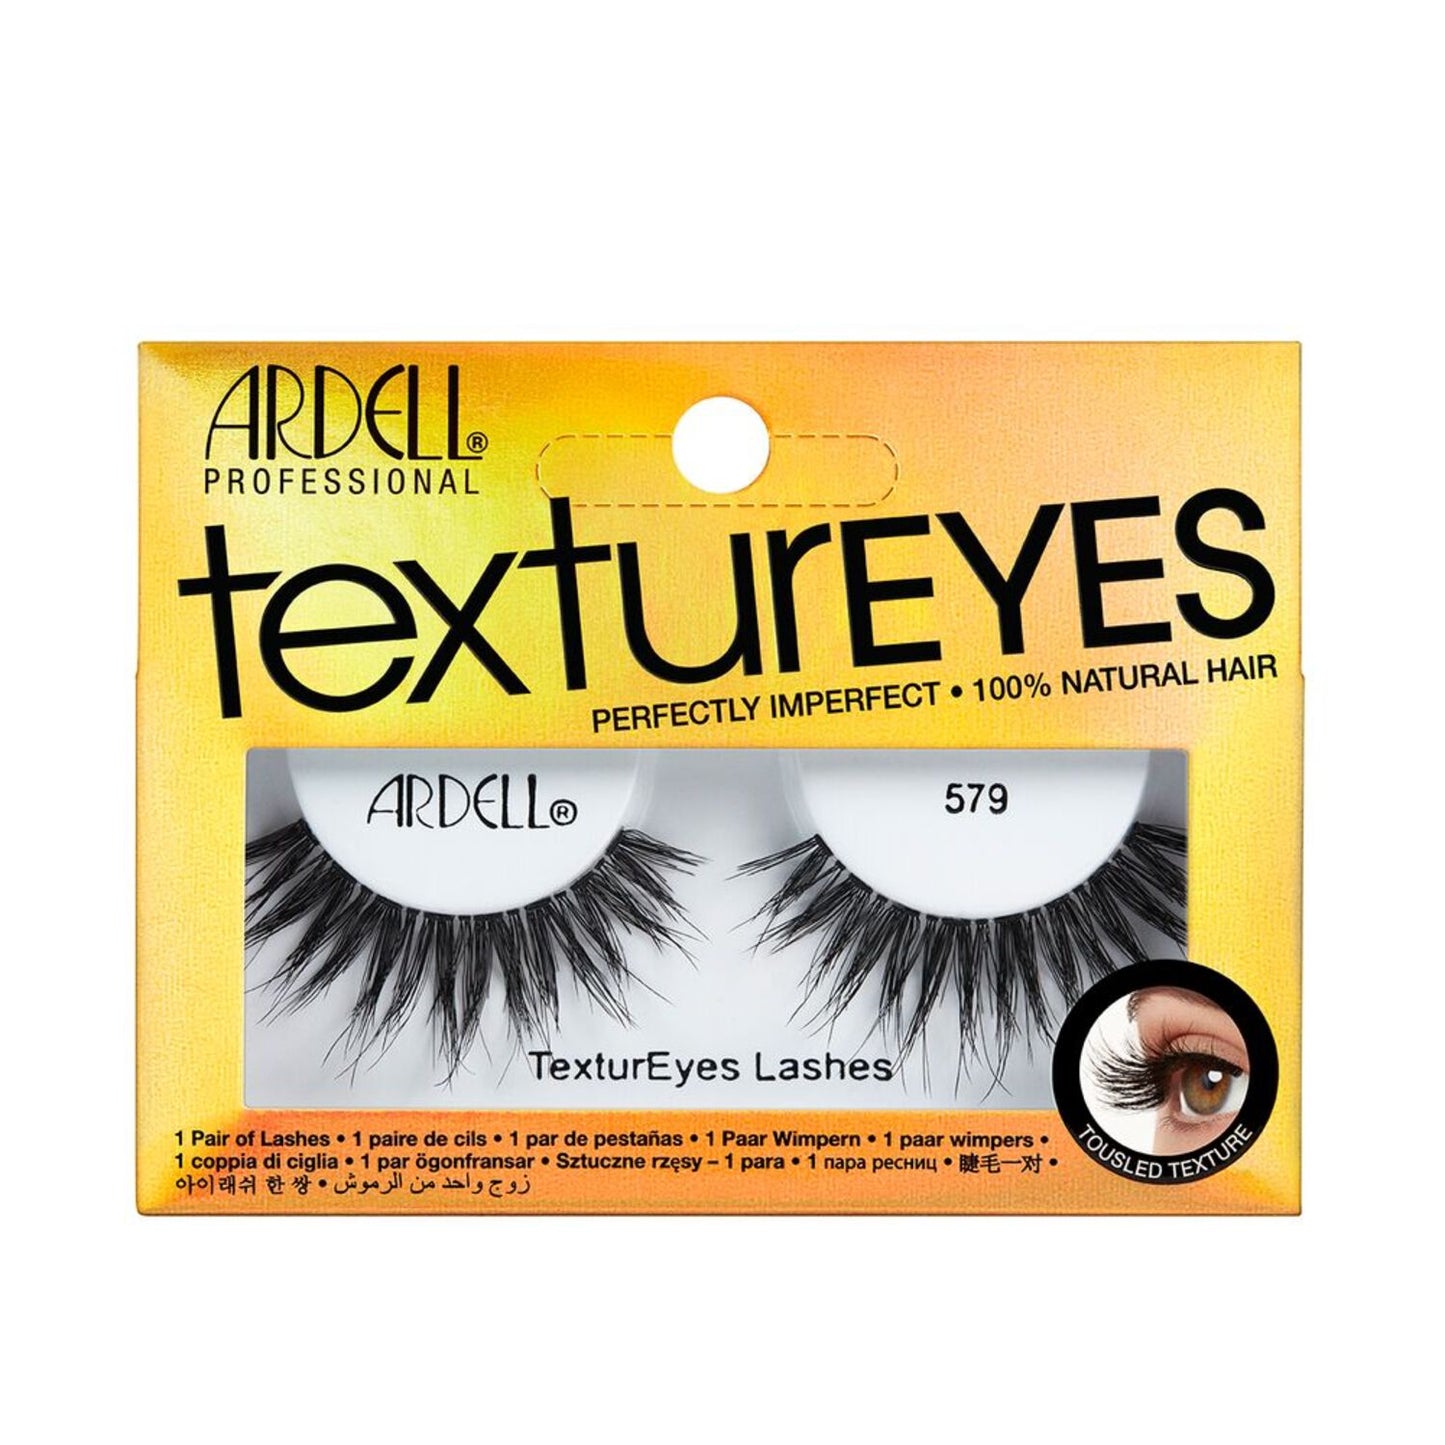 TexturEyes Lashes  by   Ardell TexturEyes #579 Lashes